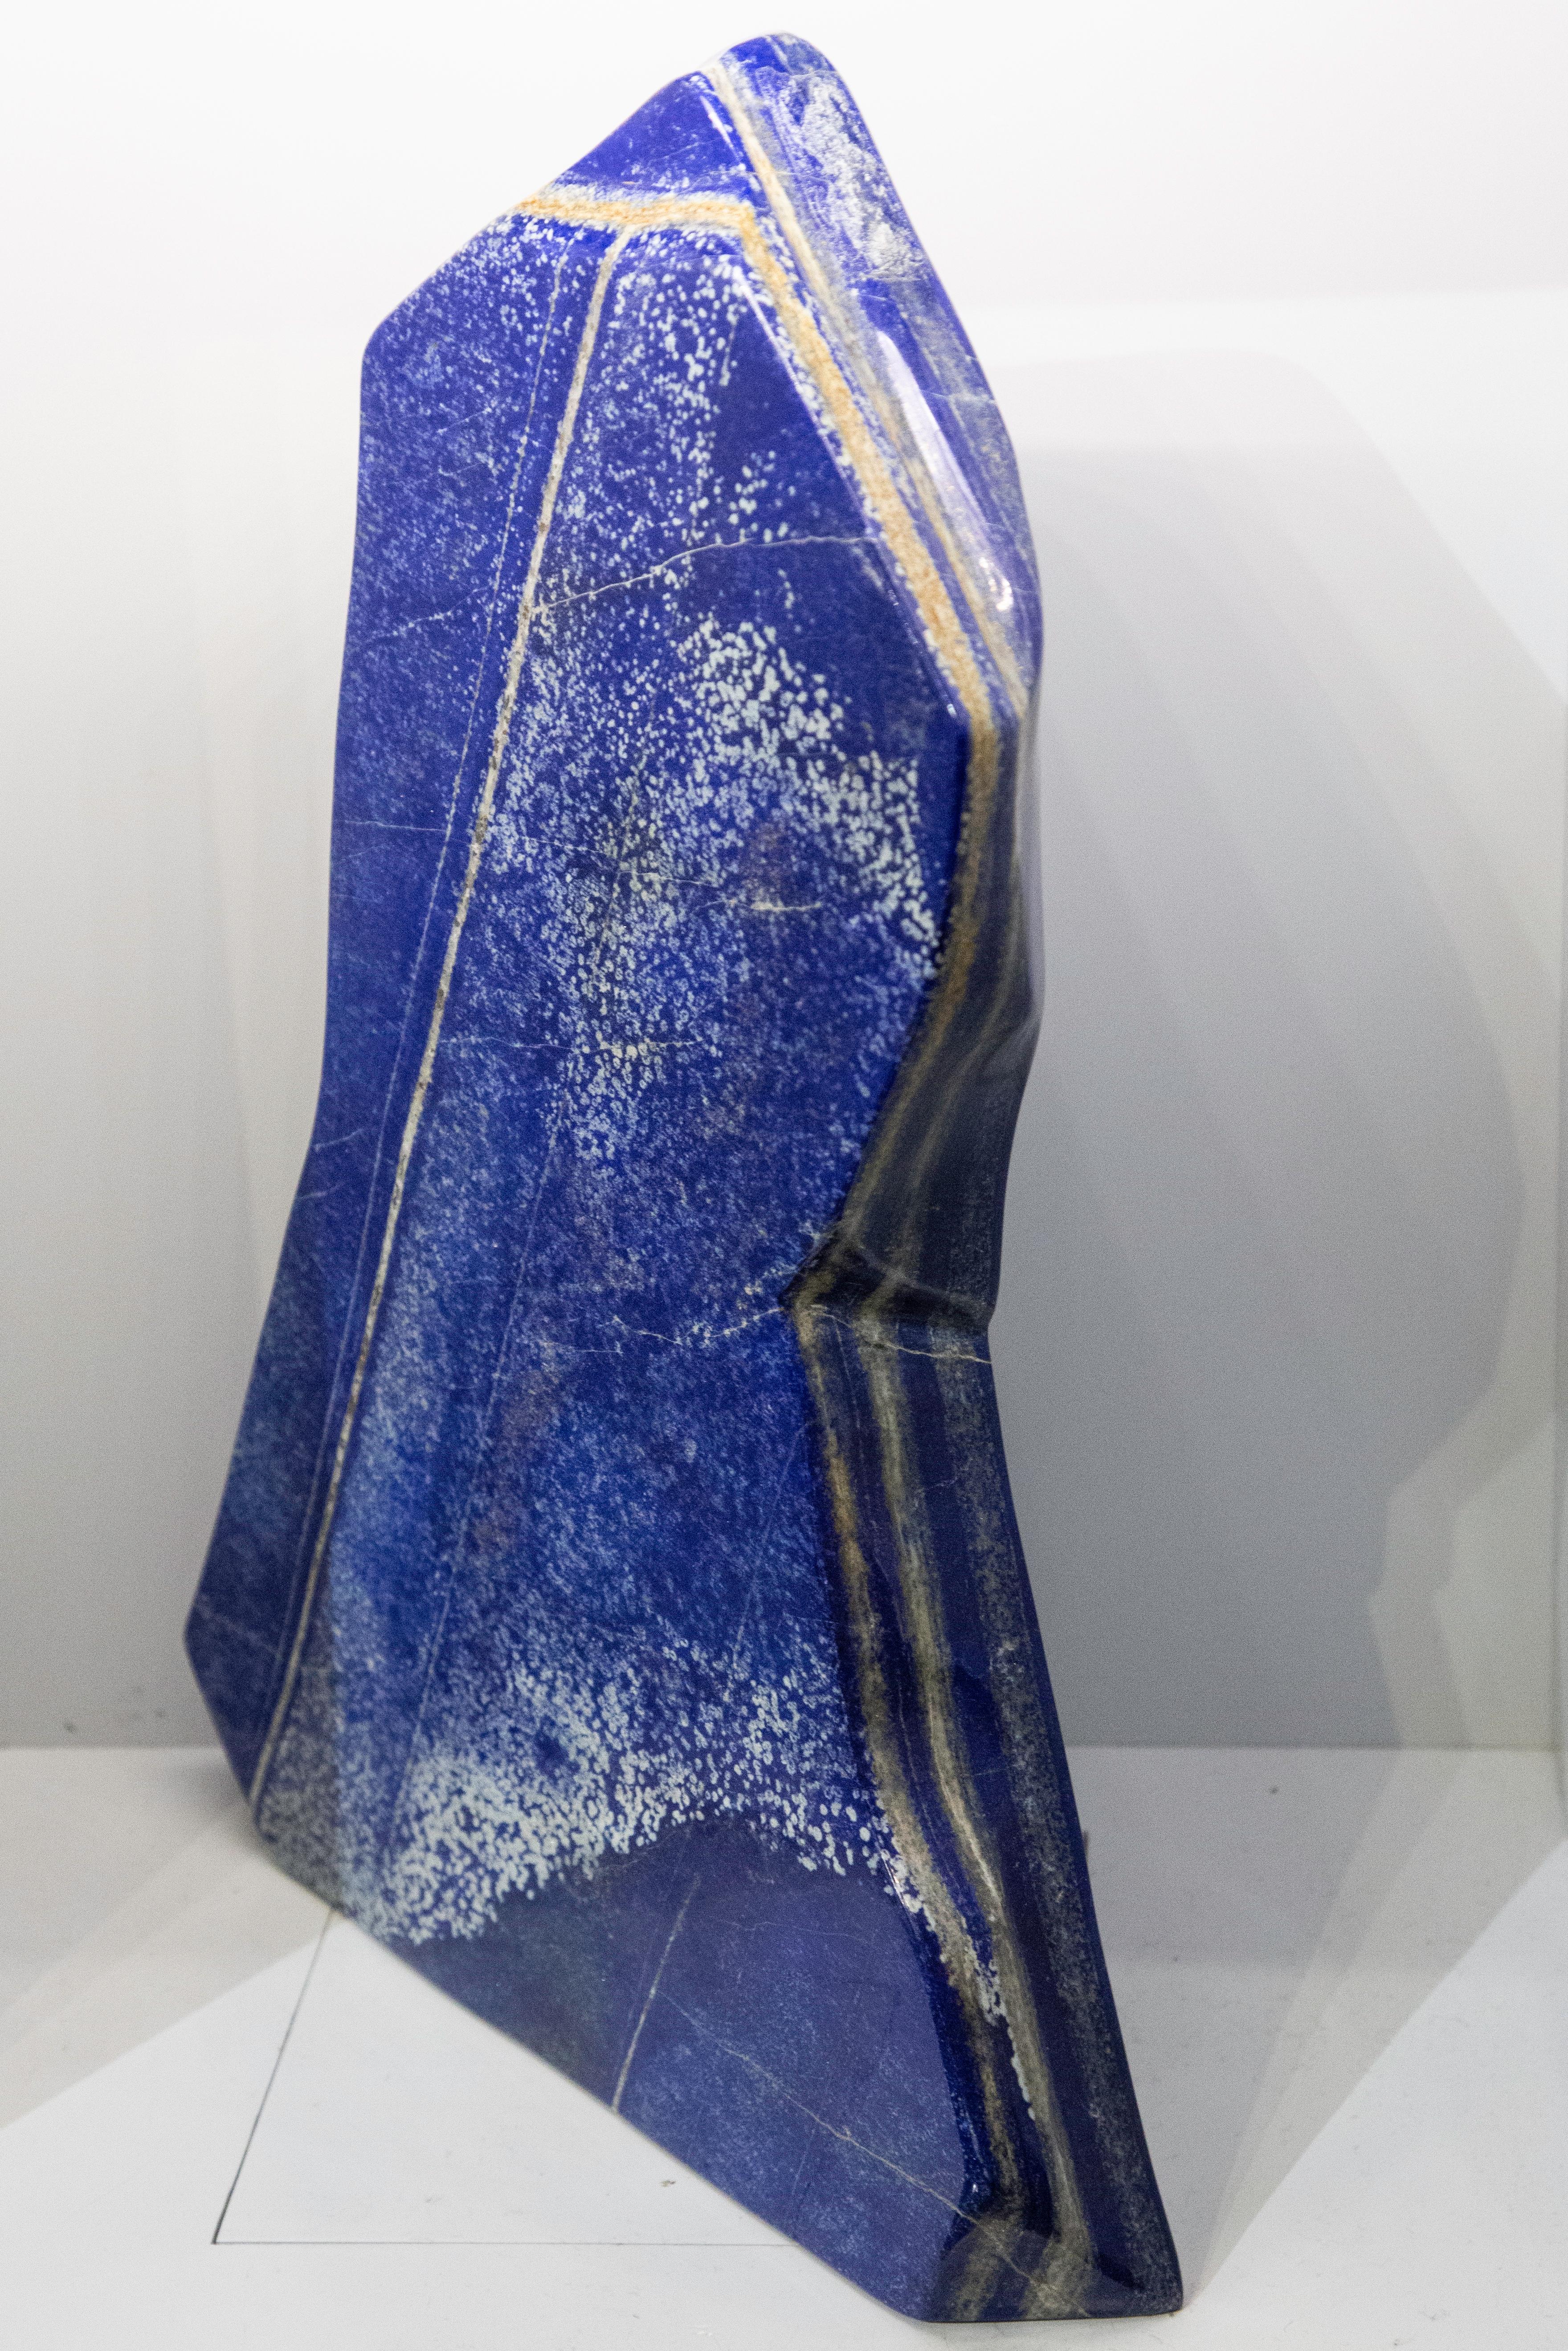 Very large polished lapis lazuli mineral specimen from Afghanistan, free standing and weighing 42 lbs. This semi-precious stone has been prized since antiquity due to its intense, beautiful blue coloring and golden speckles. It was also used in the